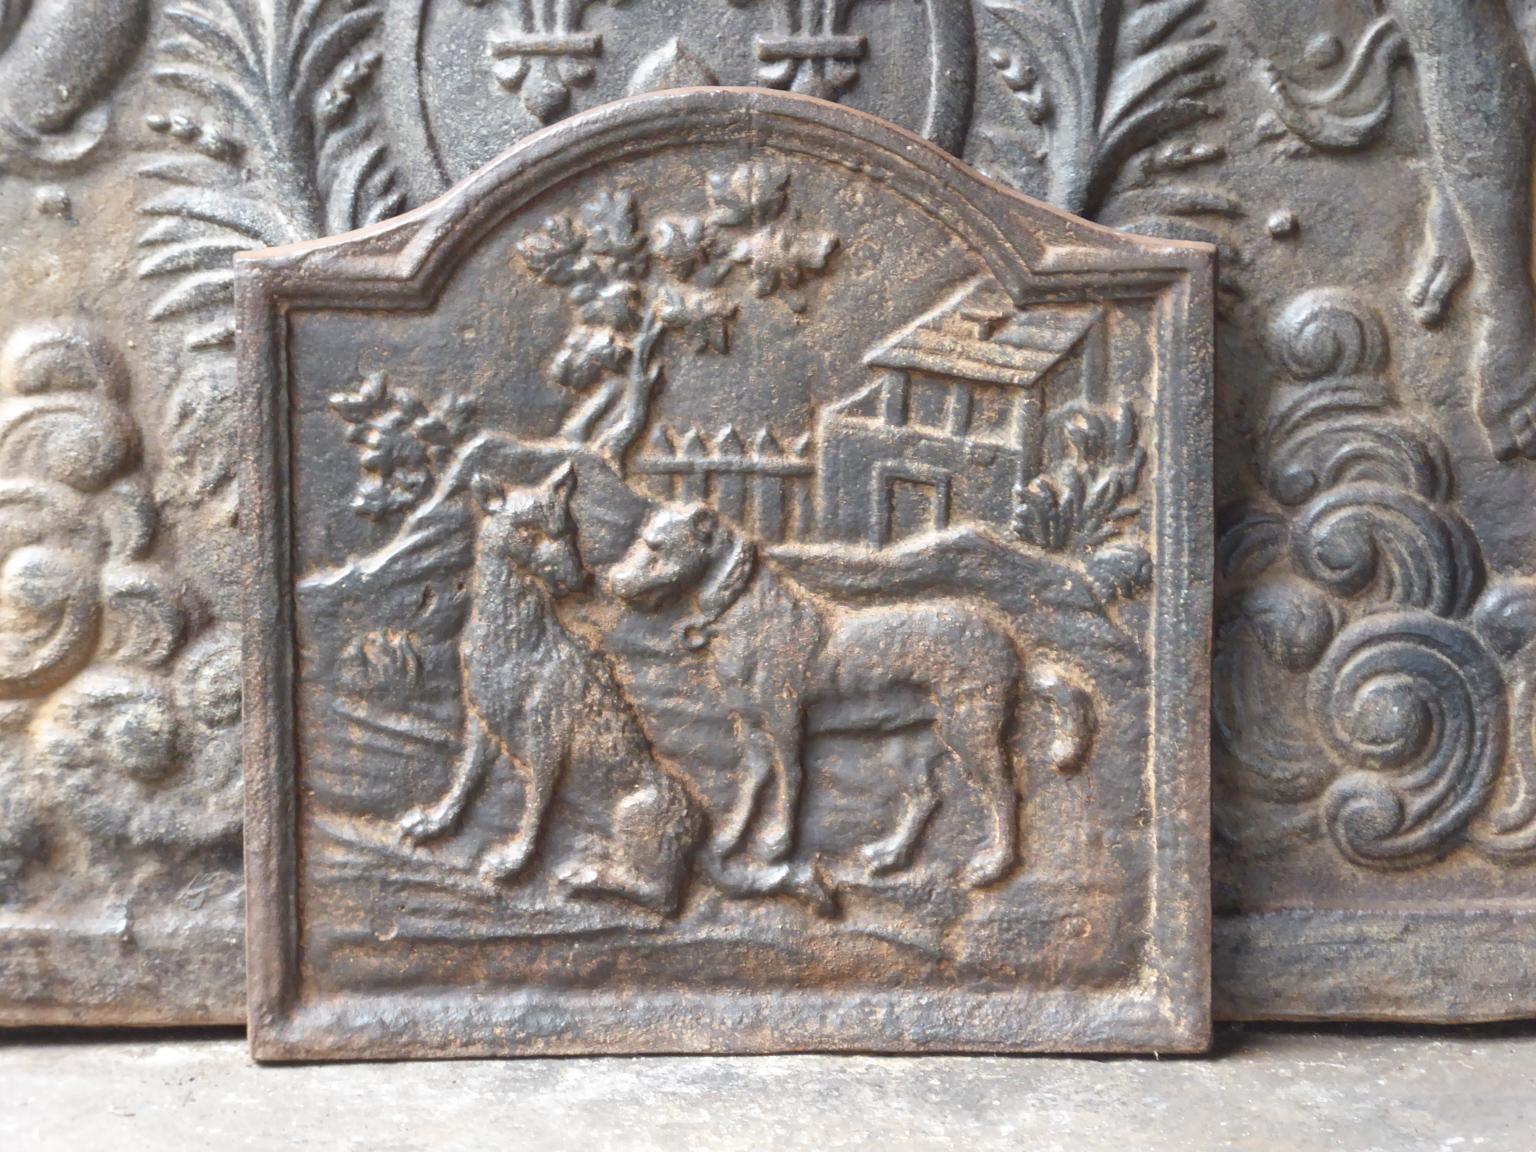 20th century French Art Nouveau fireback with the fable of the wolf and the dog (Jean de la Fontaine 1621-1695). A hungry wolf meets a well-fed dog and compliments him on his good appearance. The dog describes his life of ease and invites the wolf